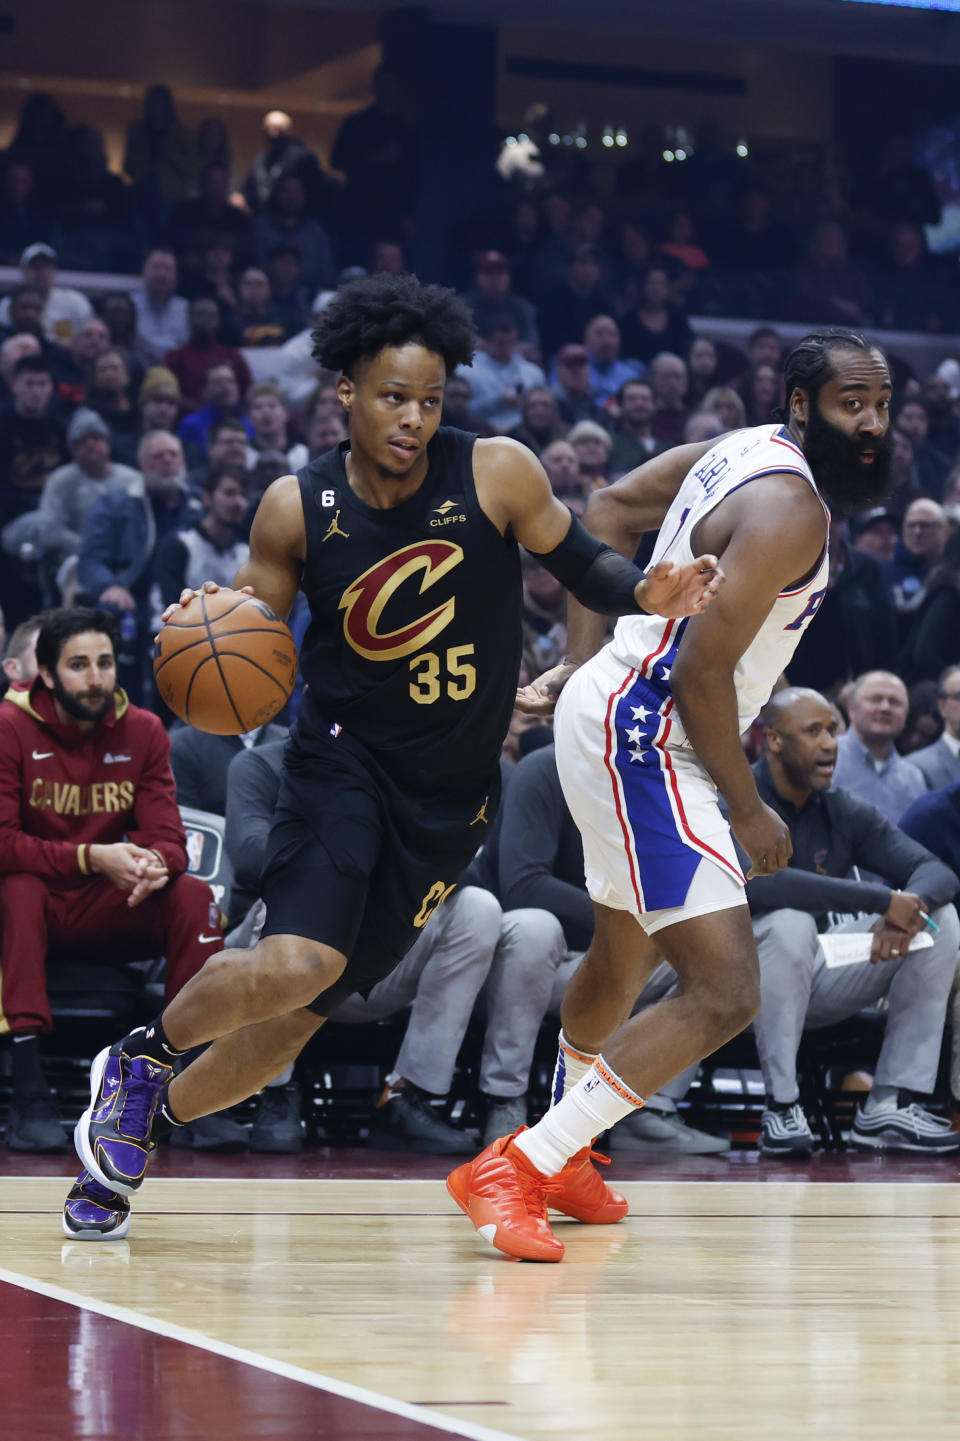 Cleveland Cavaliers forward Isaac Okoro (35) drives against Philadelphia 76ers guard James Harden (1) during the first half of an NBA basketball game, Wednesday, March 15, 2023, in Cleveland. (AP Photo/Ron Schwane)